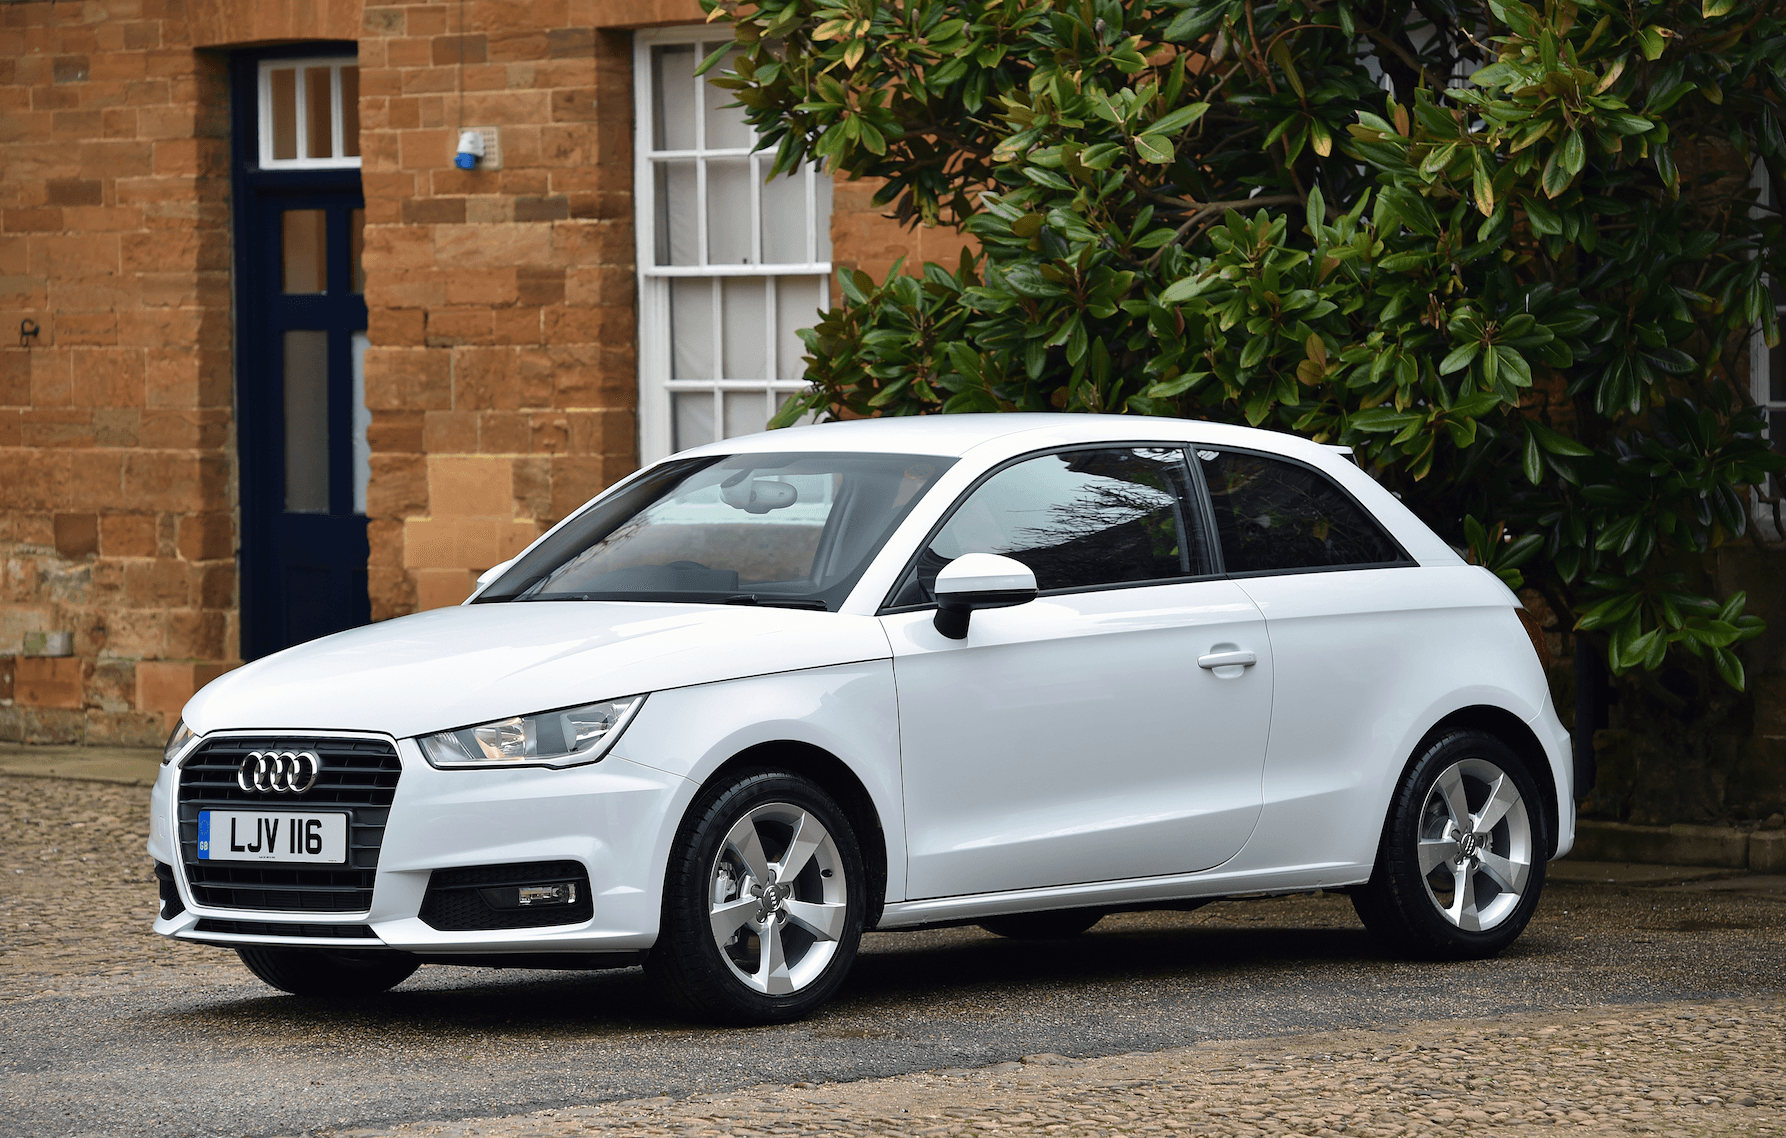 A white Audi A1 parked outside a house with bushes